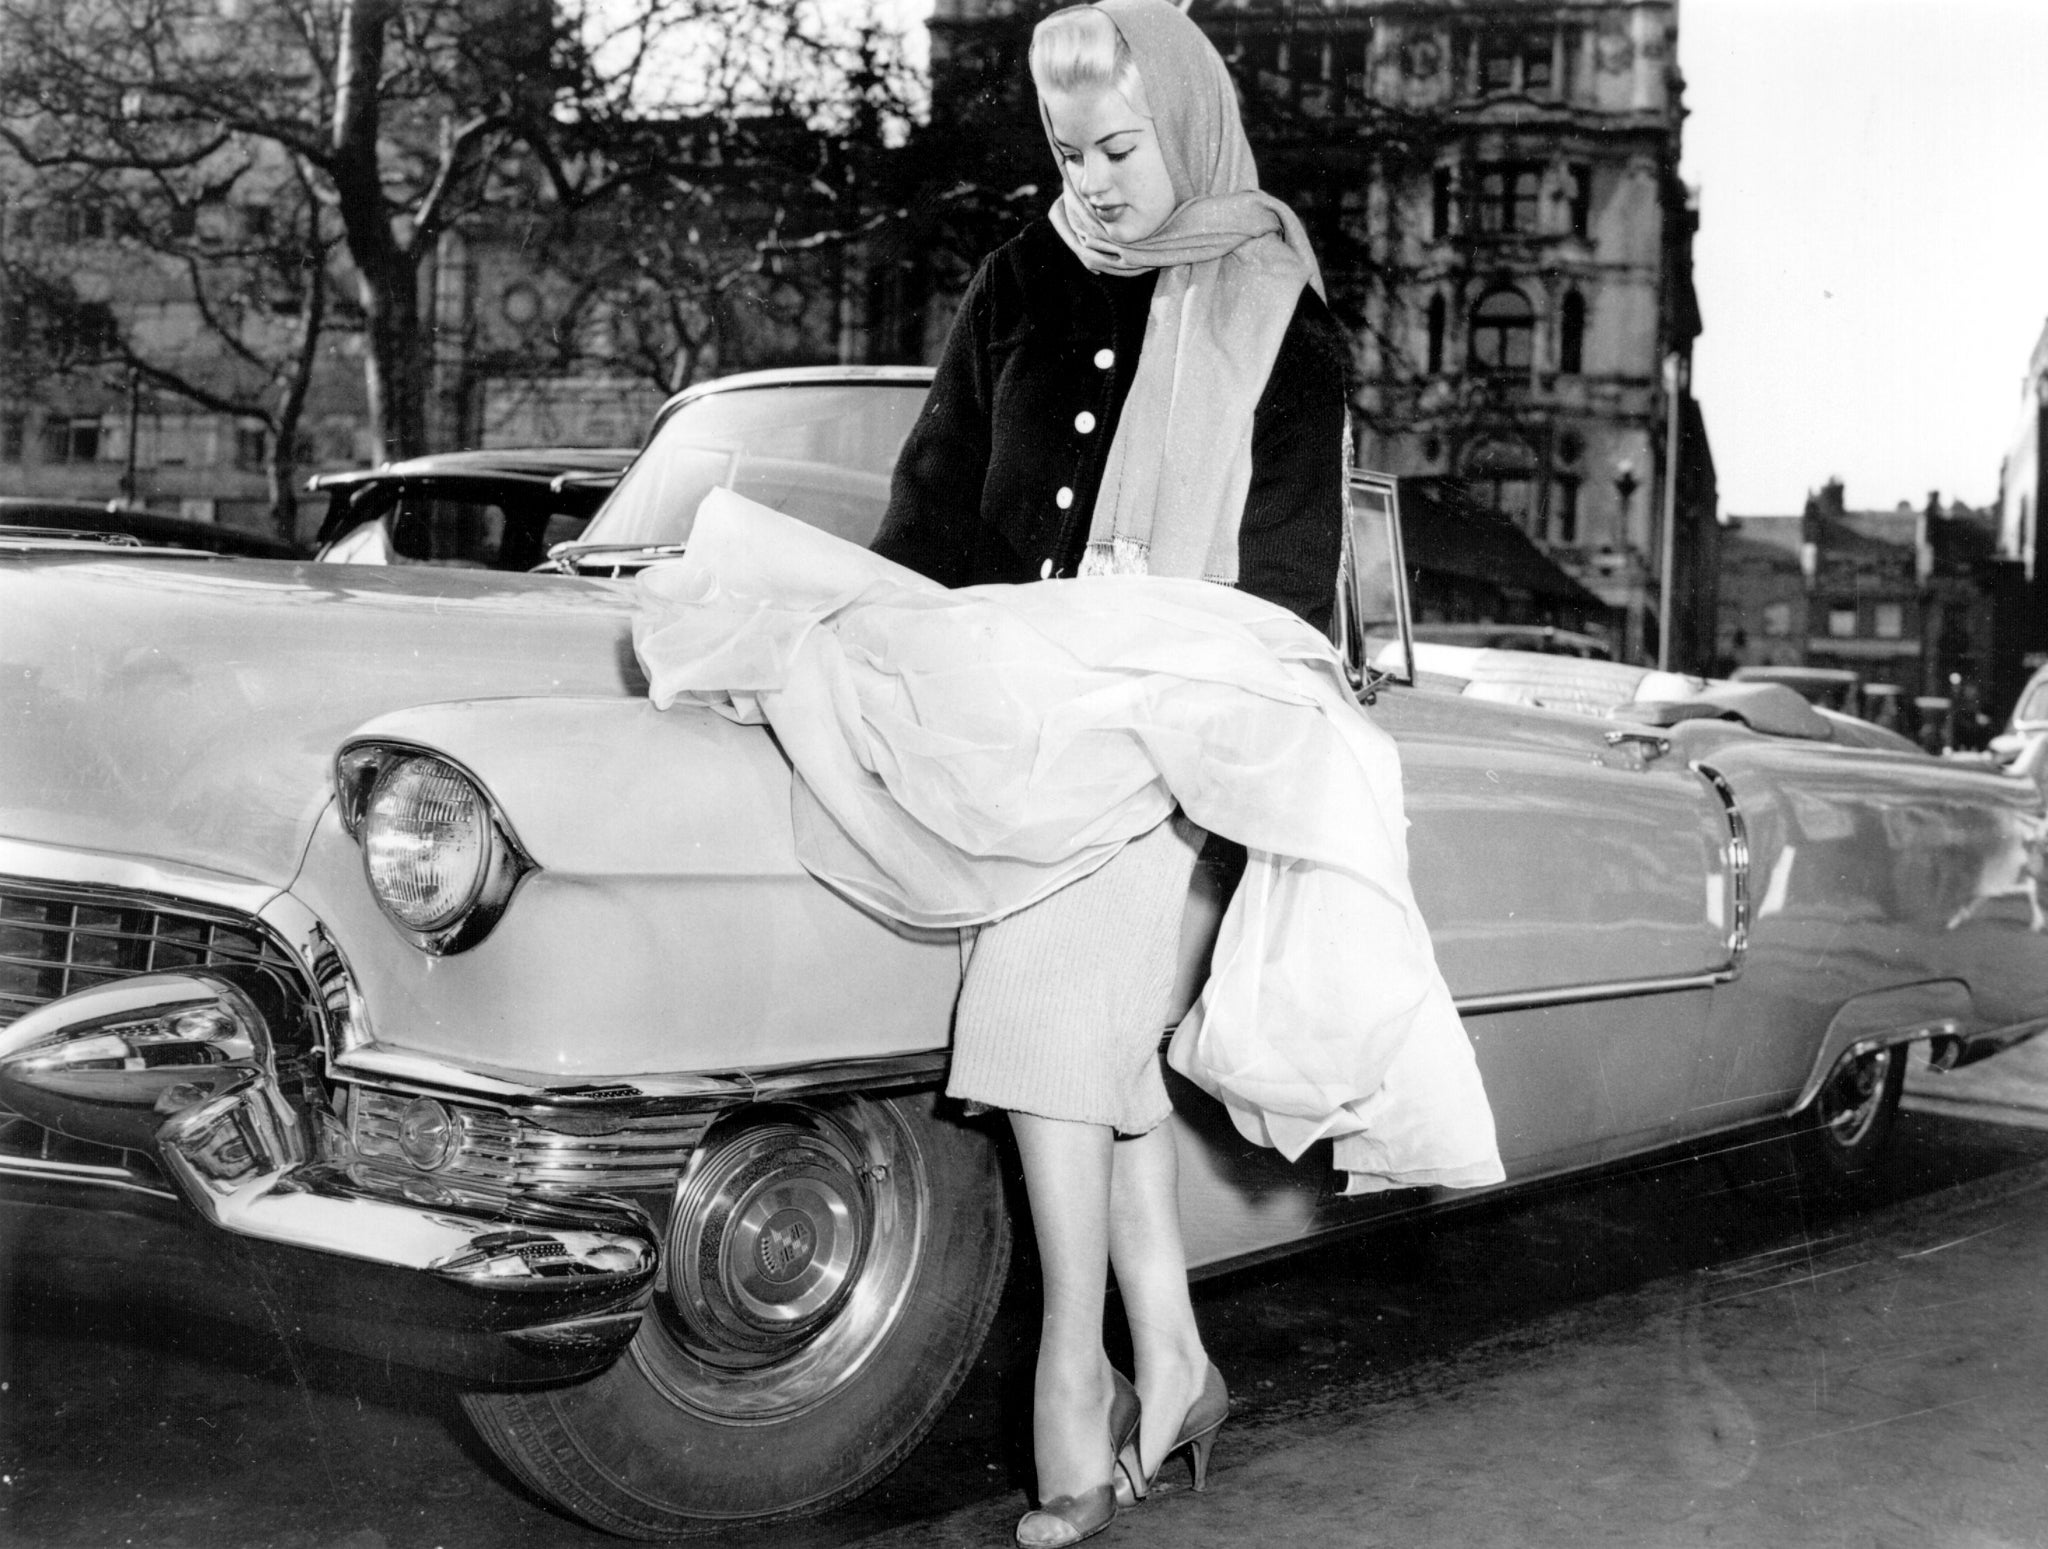 Diana Dors, the starlet, with the Cadillac in which she arrived at the Cannes Film Festival